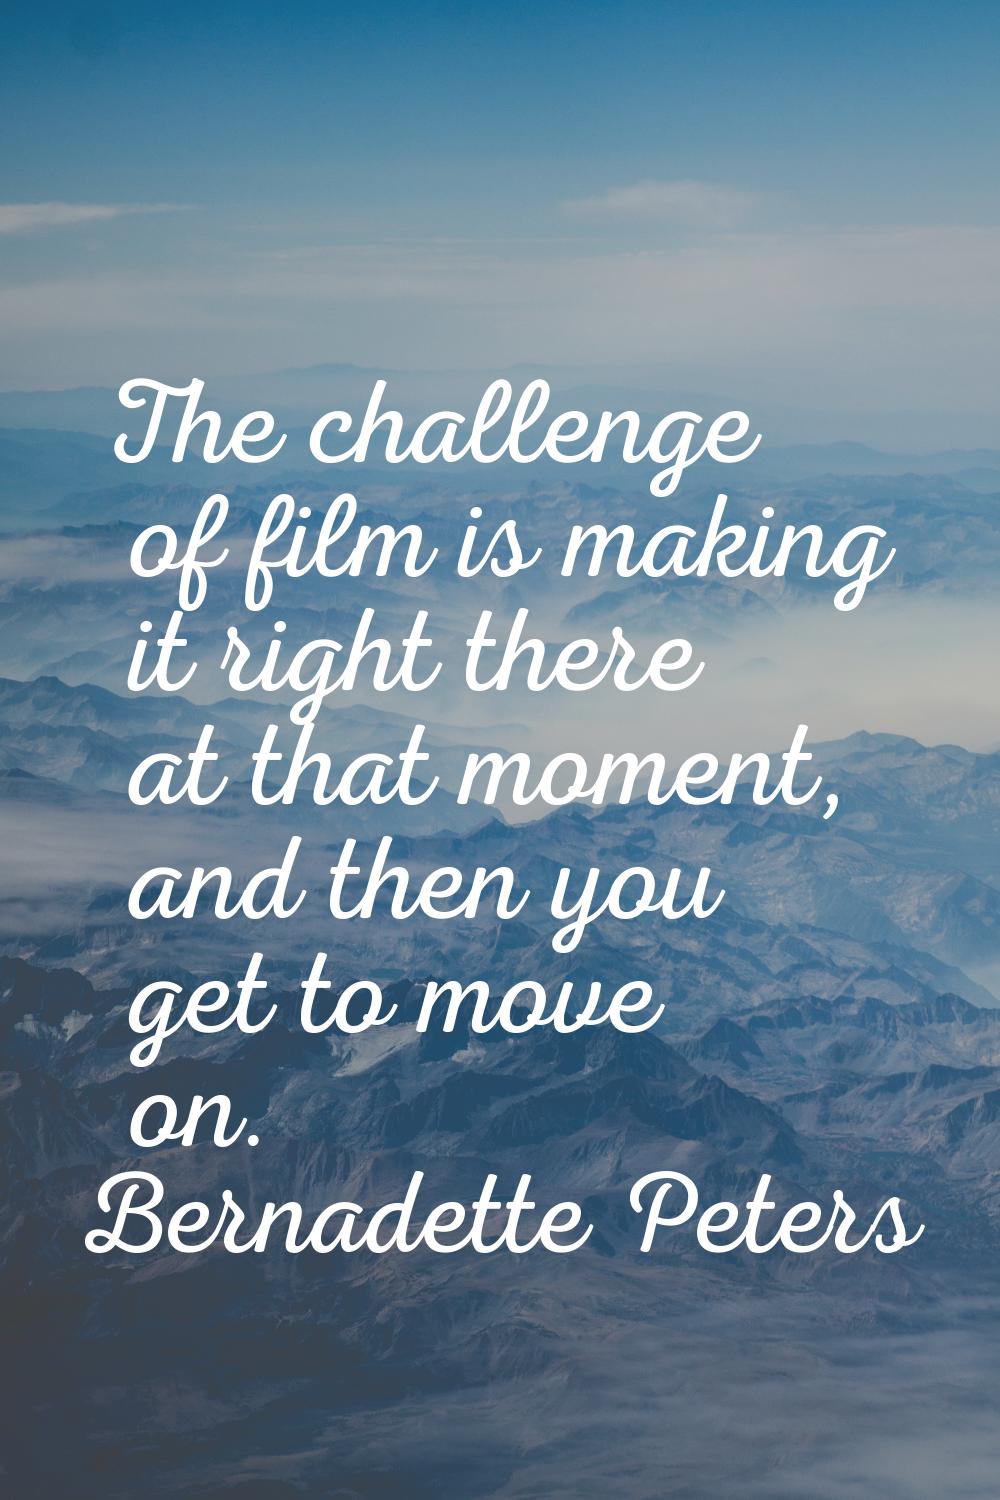 The challenge of film is making it right there at that moment, and then you get to move on.